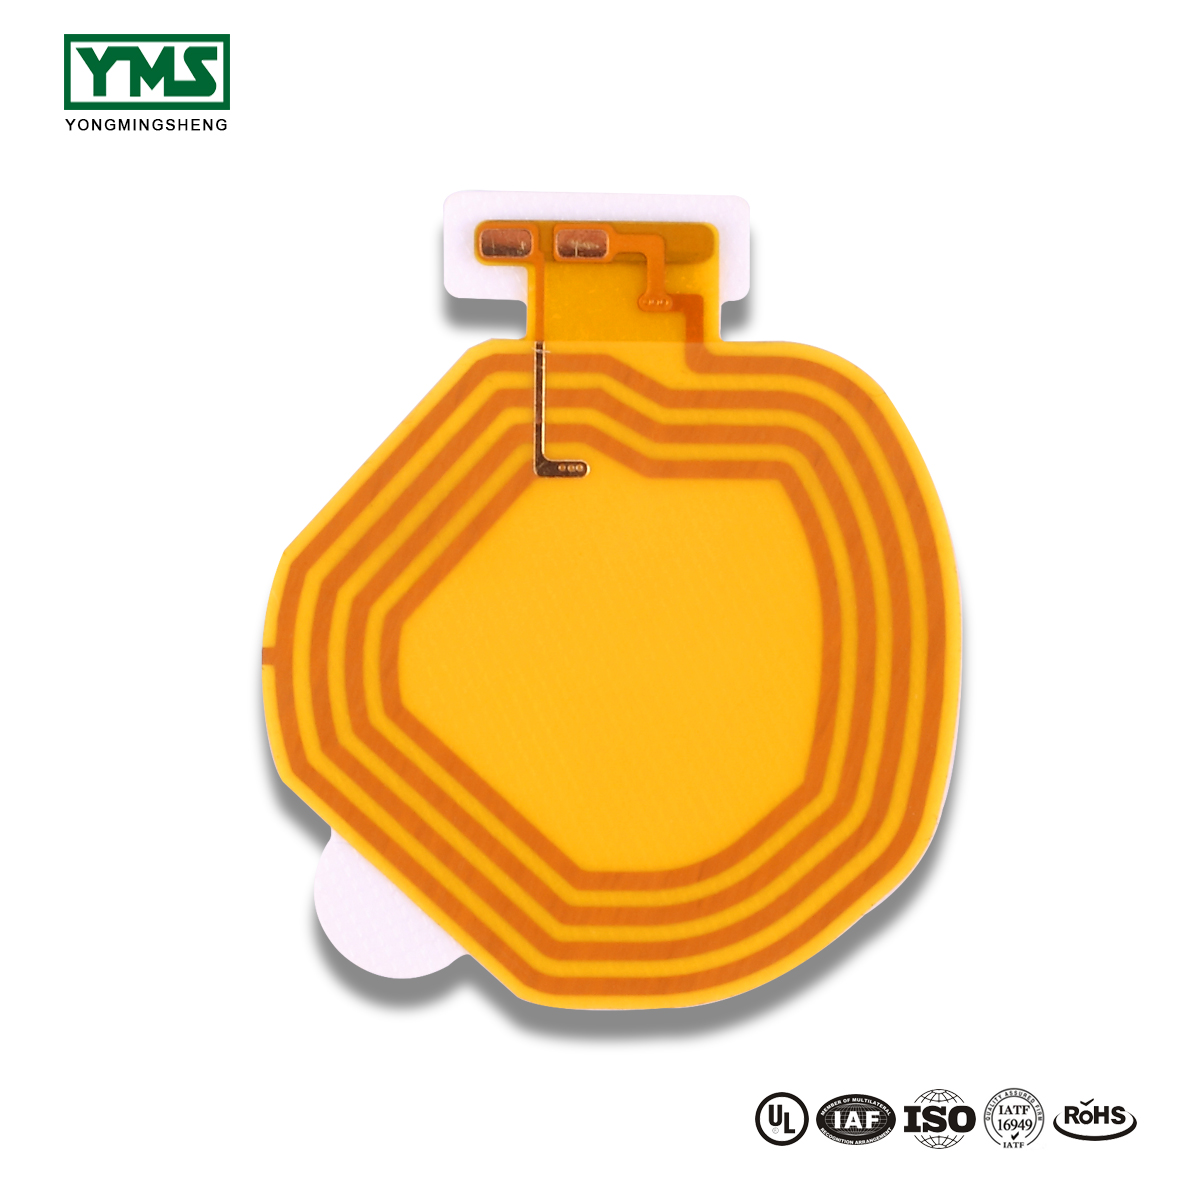 OEM Factory for Osp Pcb - 1Layer Flexible Board | YMSPCB – Yongmingsheng